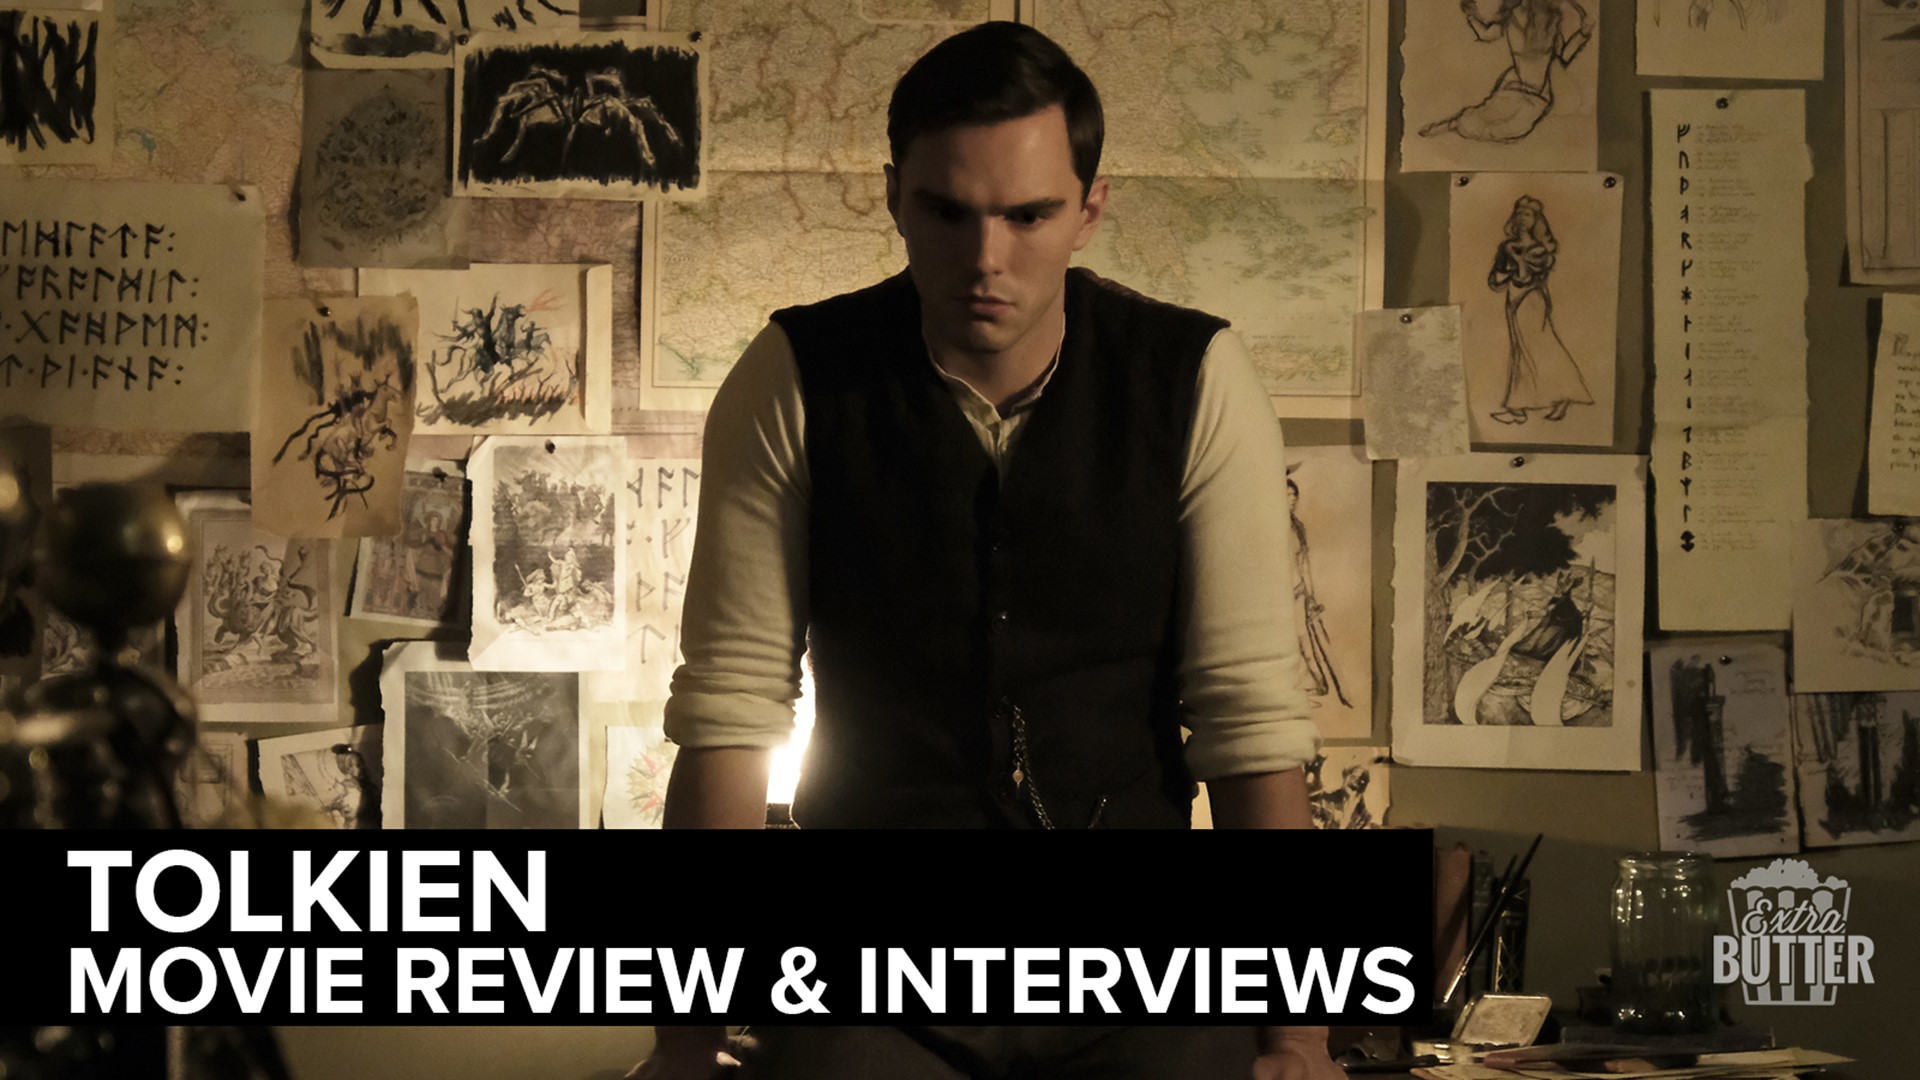 Nicholas Hoult and Lily Collins star in the new movie 'Tolkien,' based on the life of 'Lord of the Rings' author J. R. R. Tolkien. MariaaGloriaa talks with the stars.